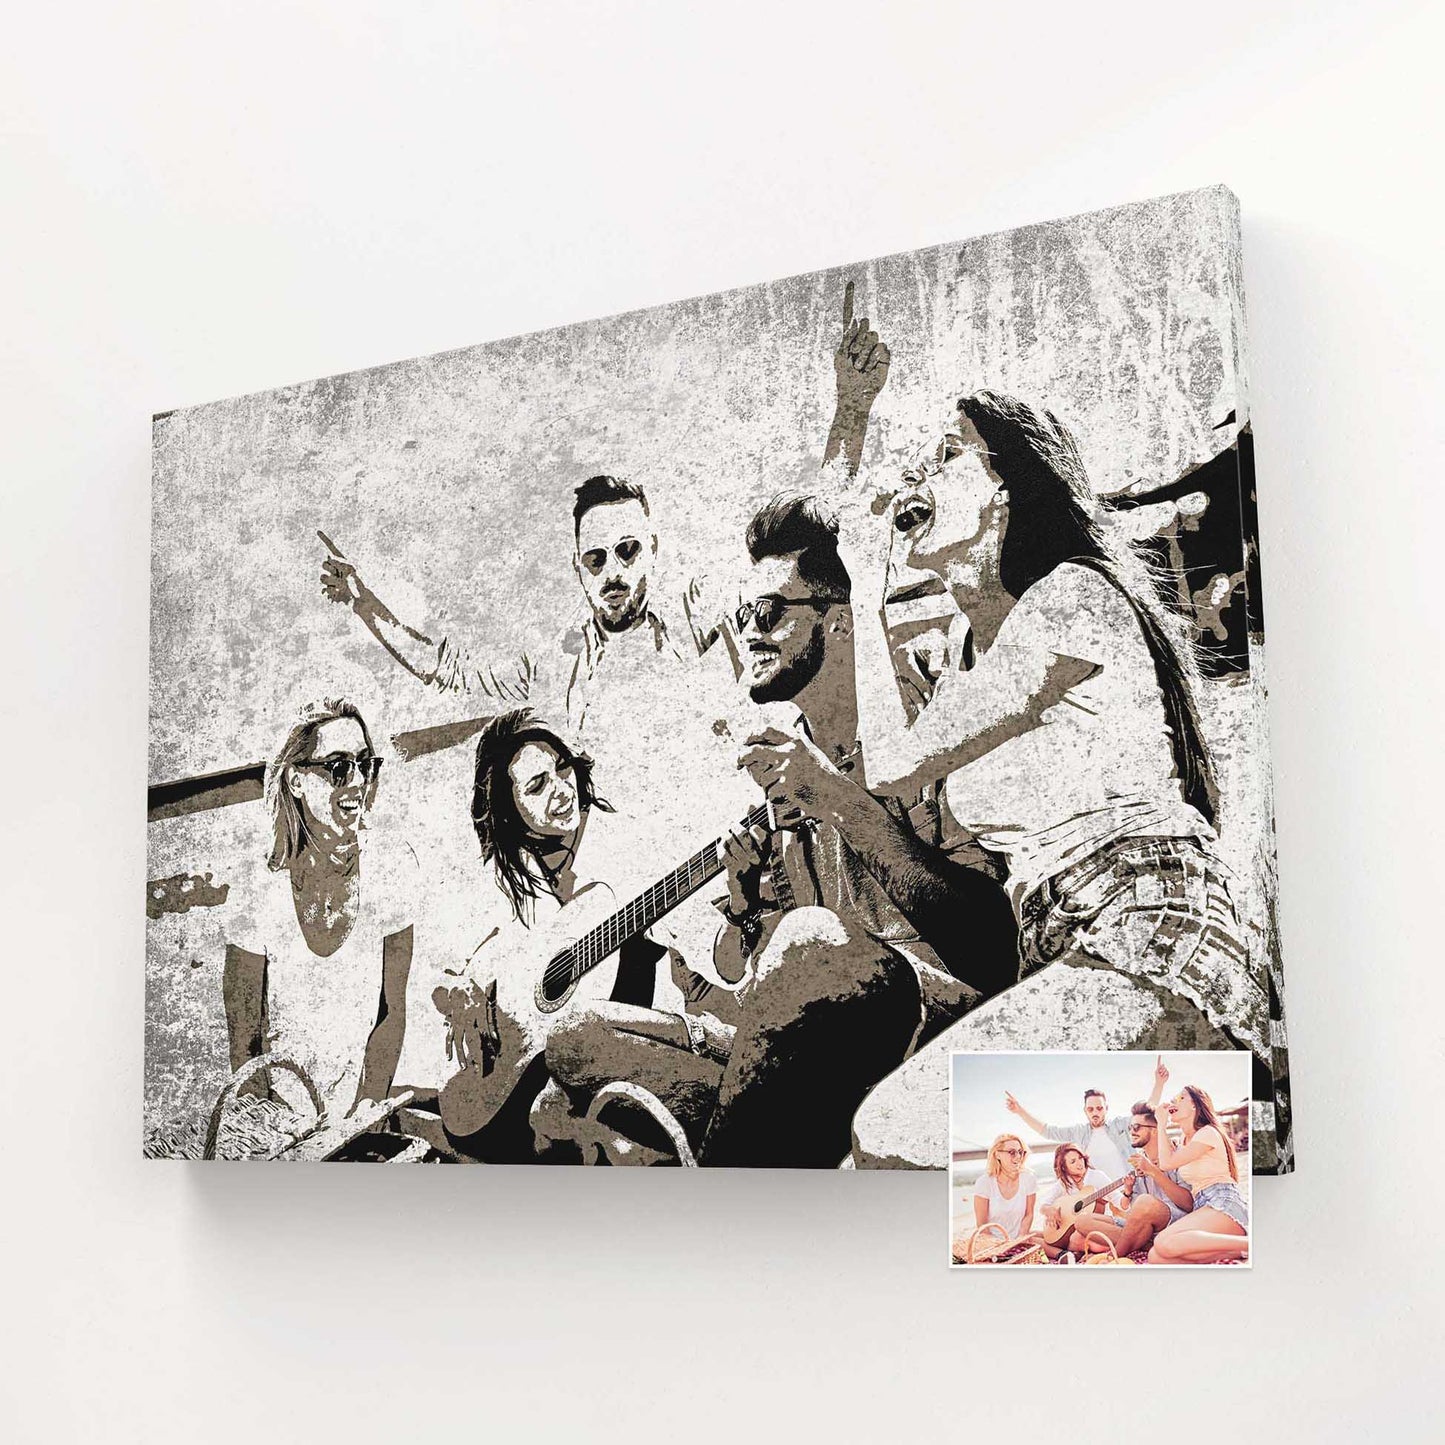 Add a contemporary twist to your home decor with our Personalised Black & White Urban Street Art Canvas. These striking pieces are created by transforming your favorite photo into a minimalist masterpiece